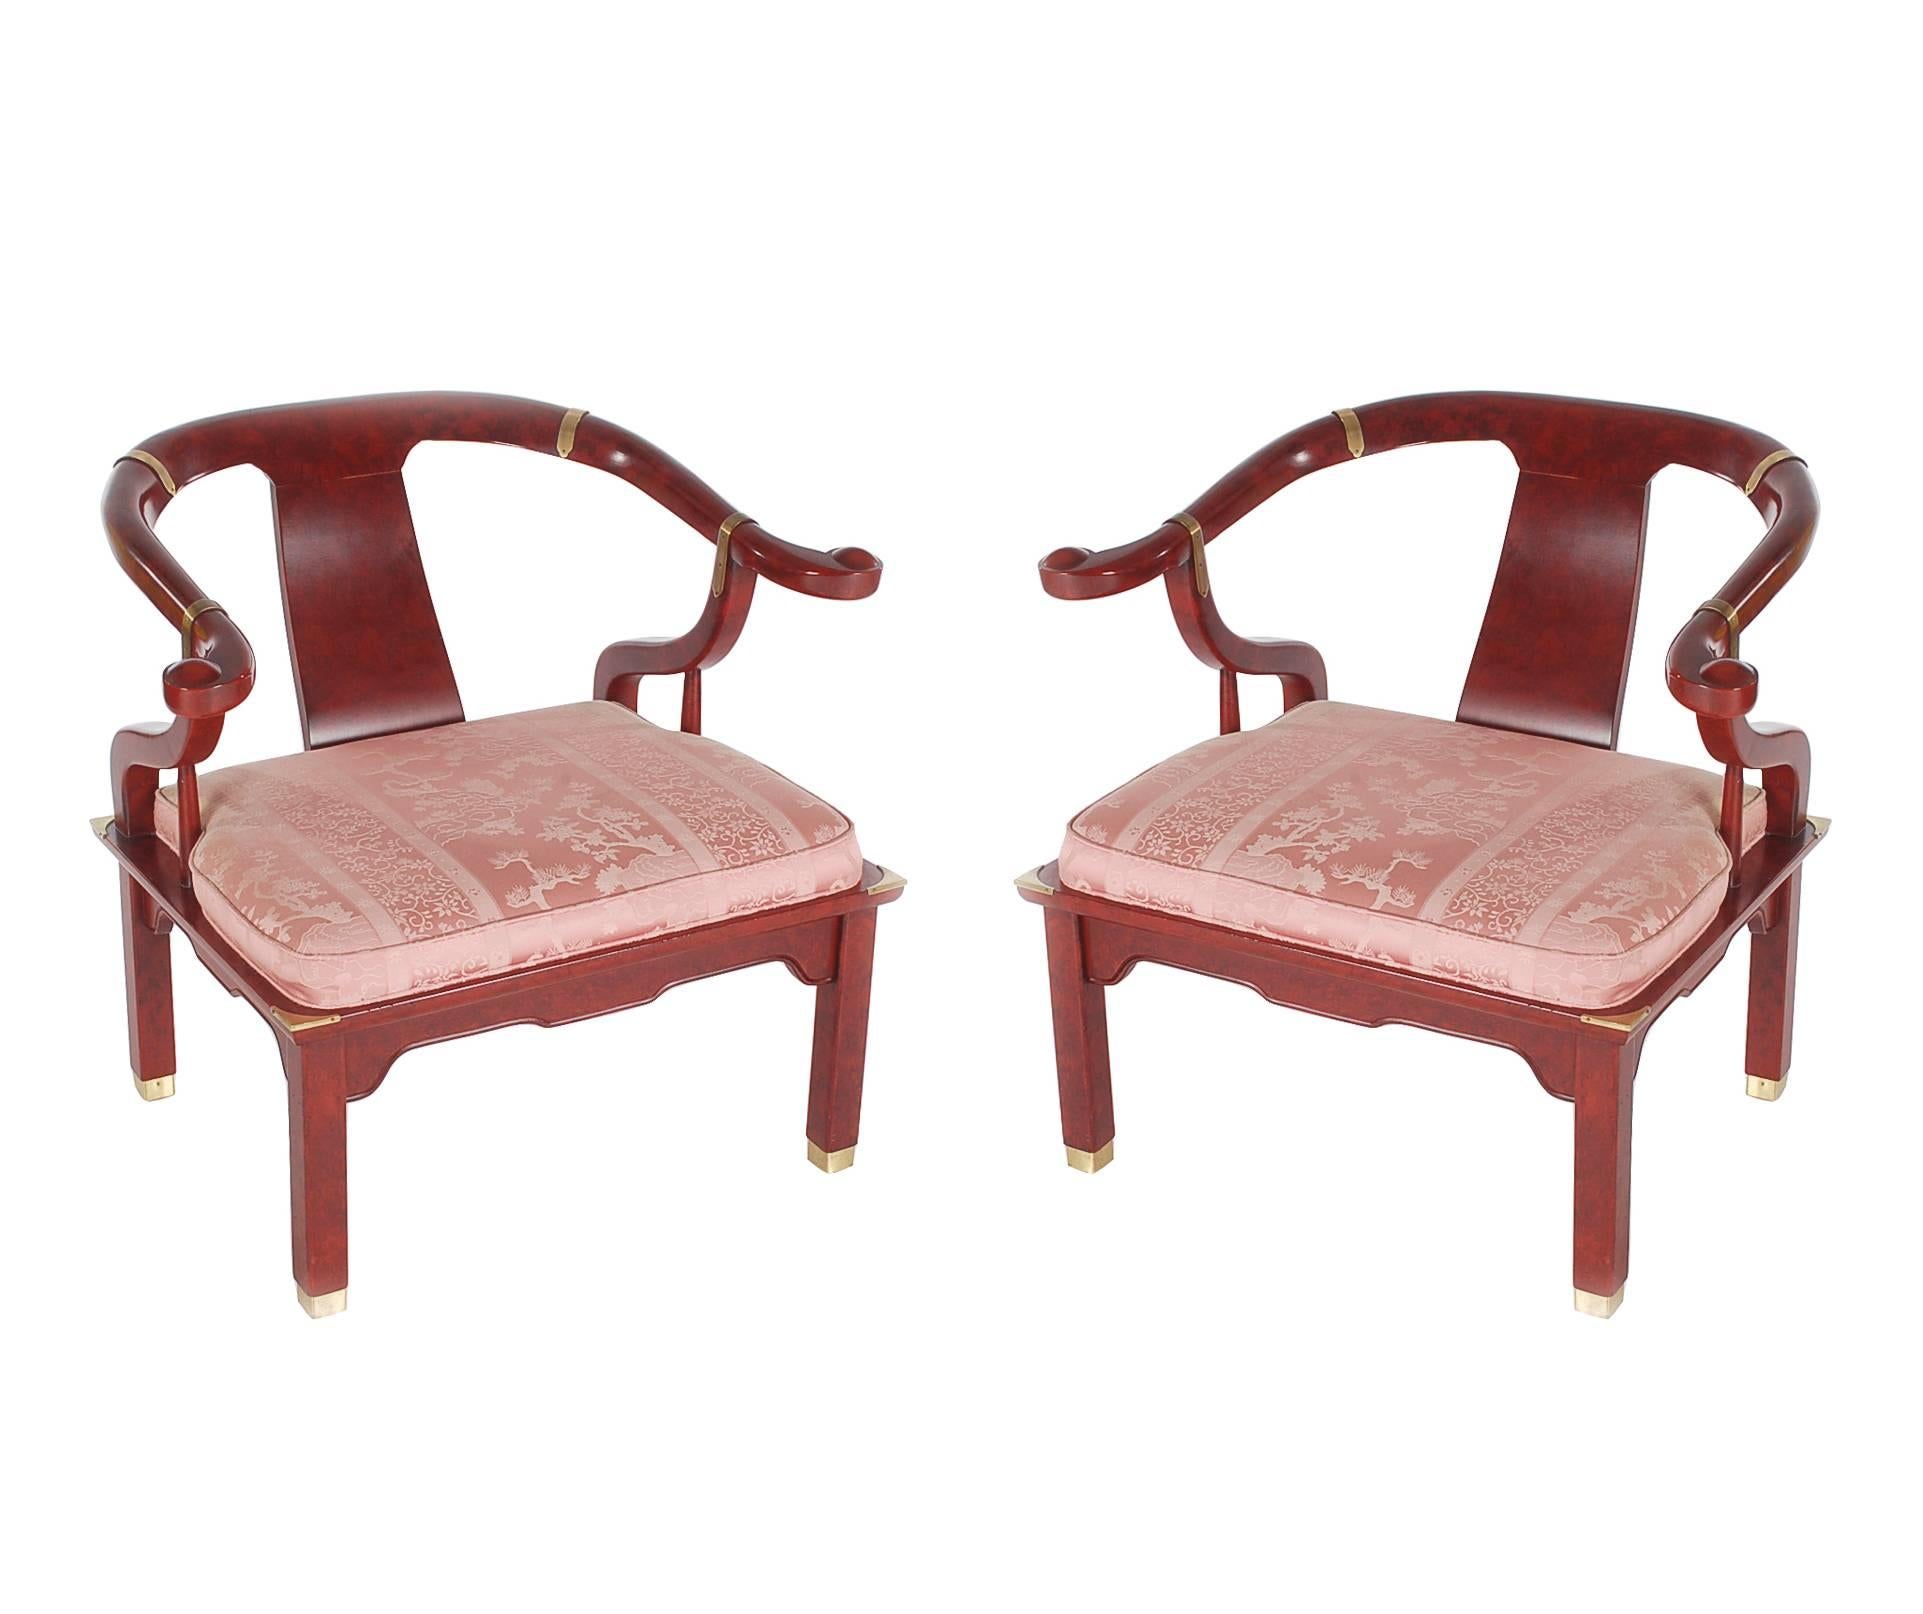 An iconic looking set of horseshoe back lounge chairs in the style of James Mont and made by Century. They feature a burgundy patinated finish, brass detailing and the original upholstery. We also have a matching settee available.